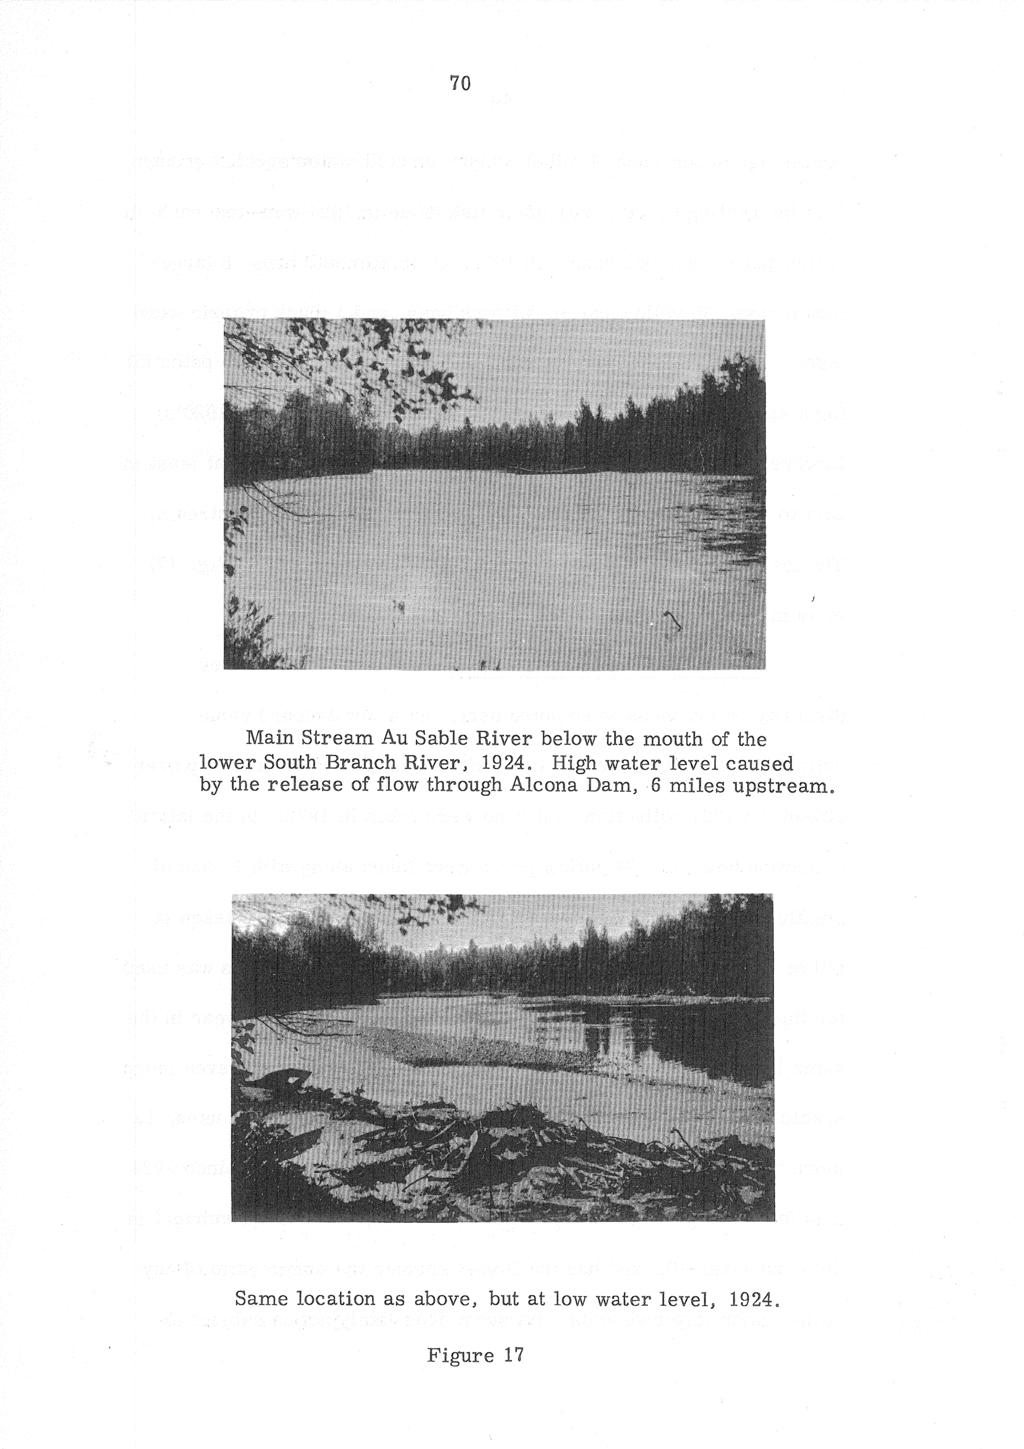 Main Stream Au Sable River below the mouth of the lower South Branch River, 1924.